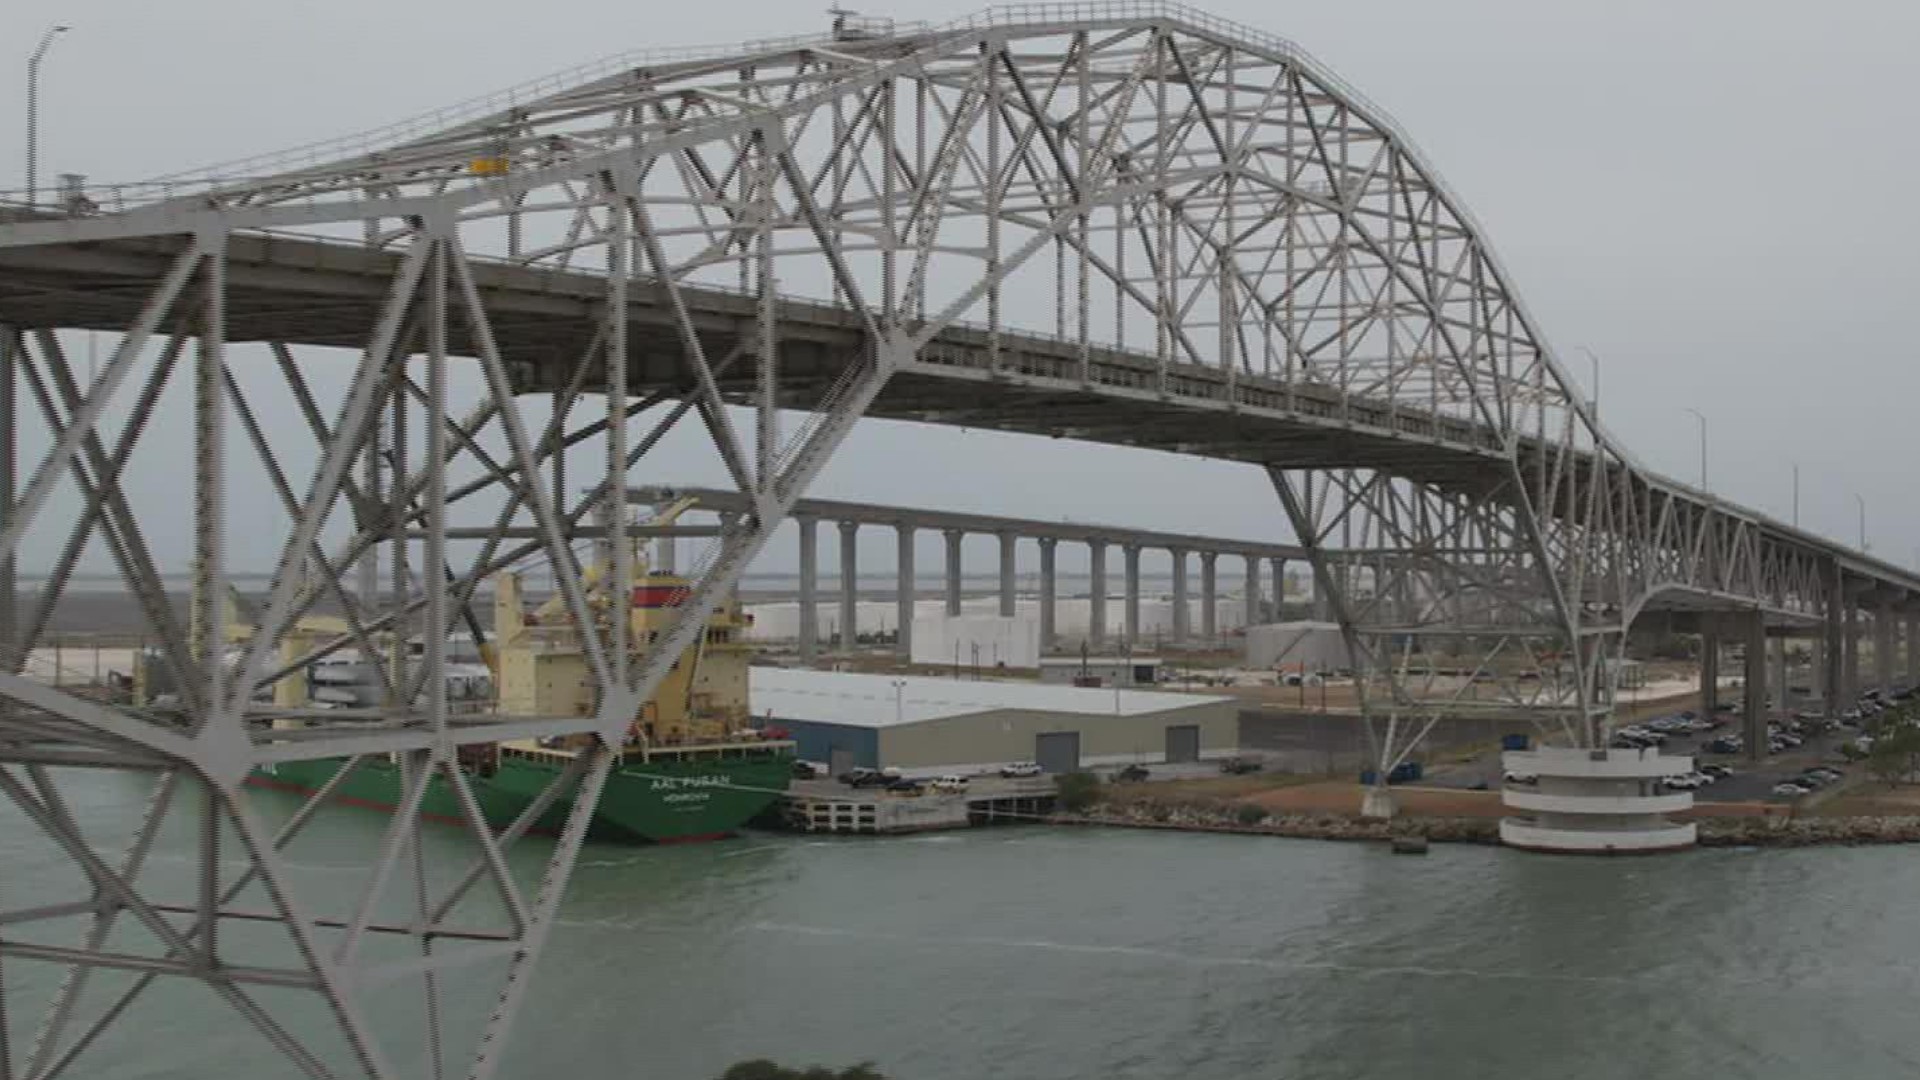 TxDOT officials said the current Harbor Bridge continues to be maintained and inspected. In fact, crews are scheduled to sandblast and paint the bridge this fall.